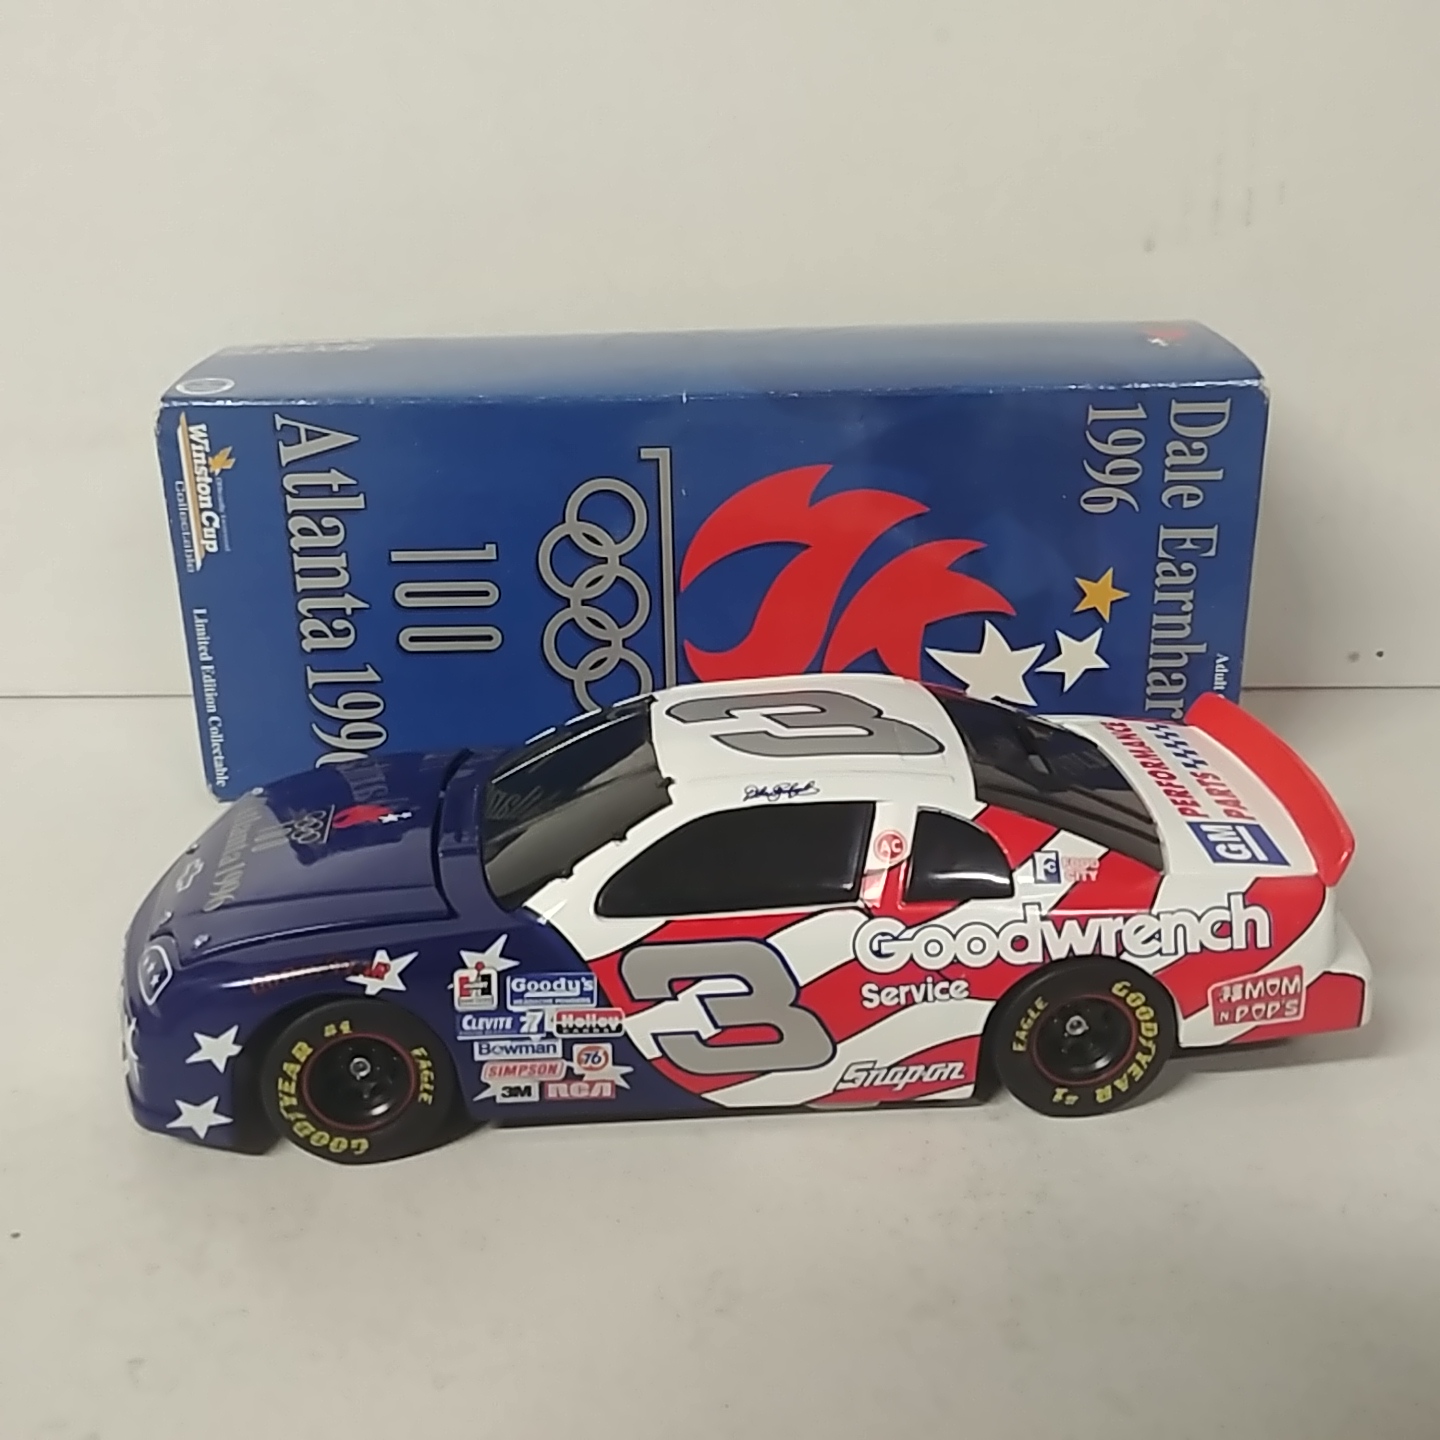 1996 Dale Earnhardt 1/24th Goodwrench "Olympics" black window bank Monte Carlo